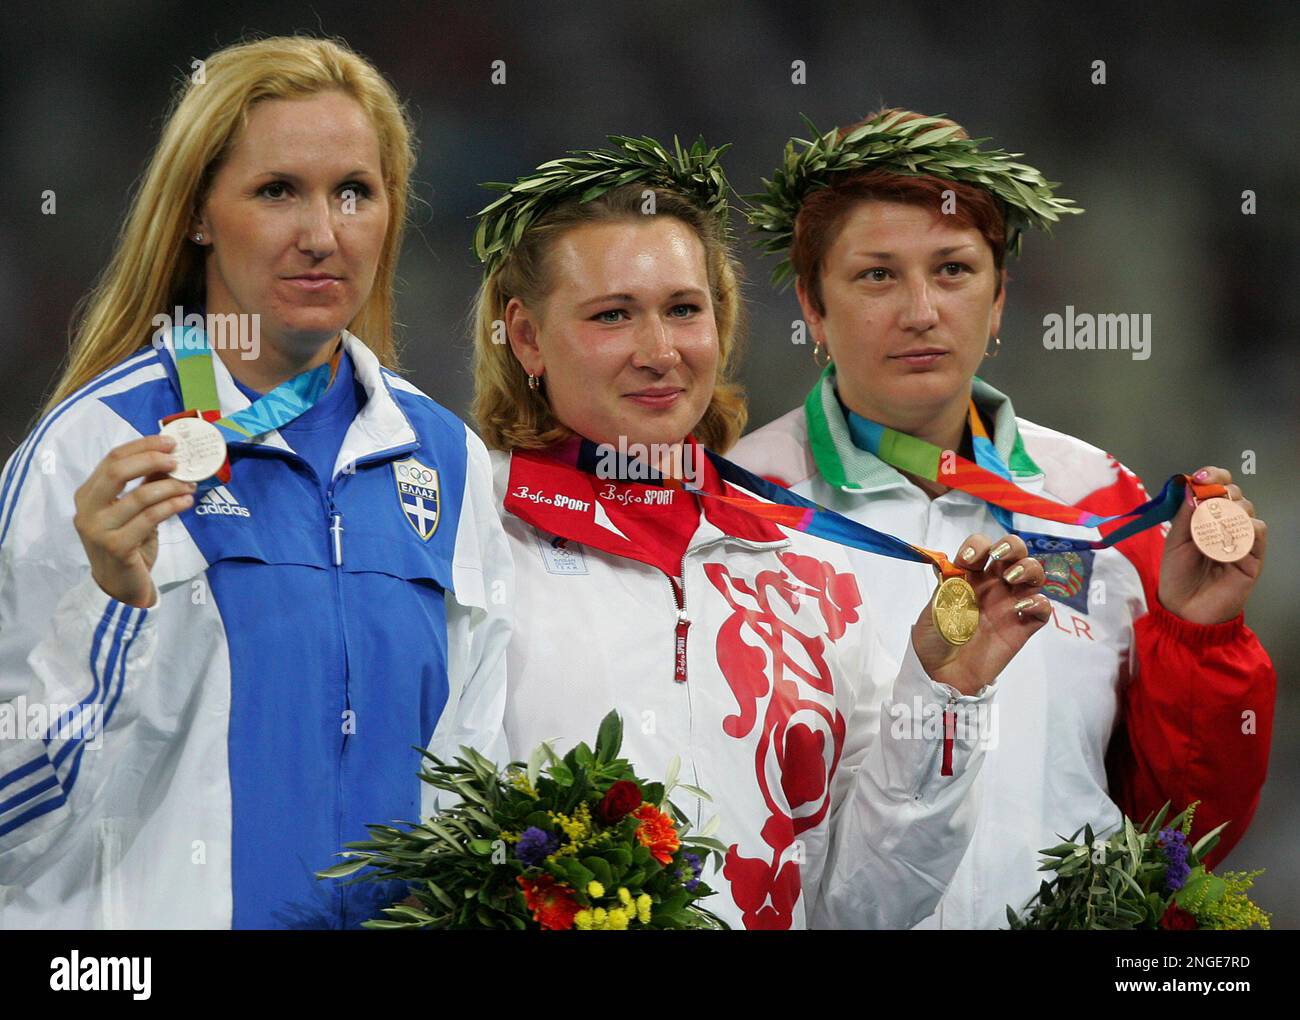 Natalya Sadova, center, of Russia, won the discus gold medal with a throw of 67.02 meters at the 2004 Olympic Games Sunday, Aug. 22, 2004 in Athens, Greece. Anastasia Kelesidou, left, of Greece, won the silver, and Irina Yatchenko of Belarus took the bronze. (AP Photo/David J. Phillip) Stock Photo